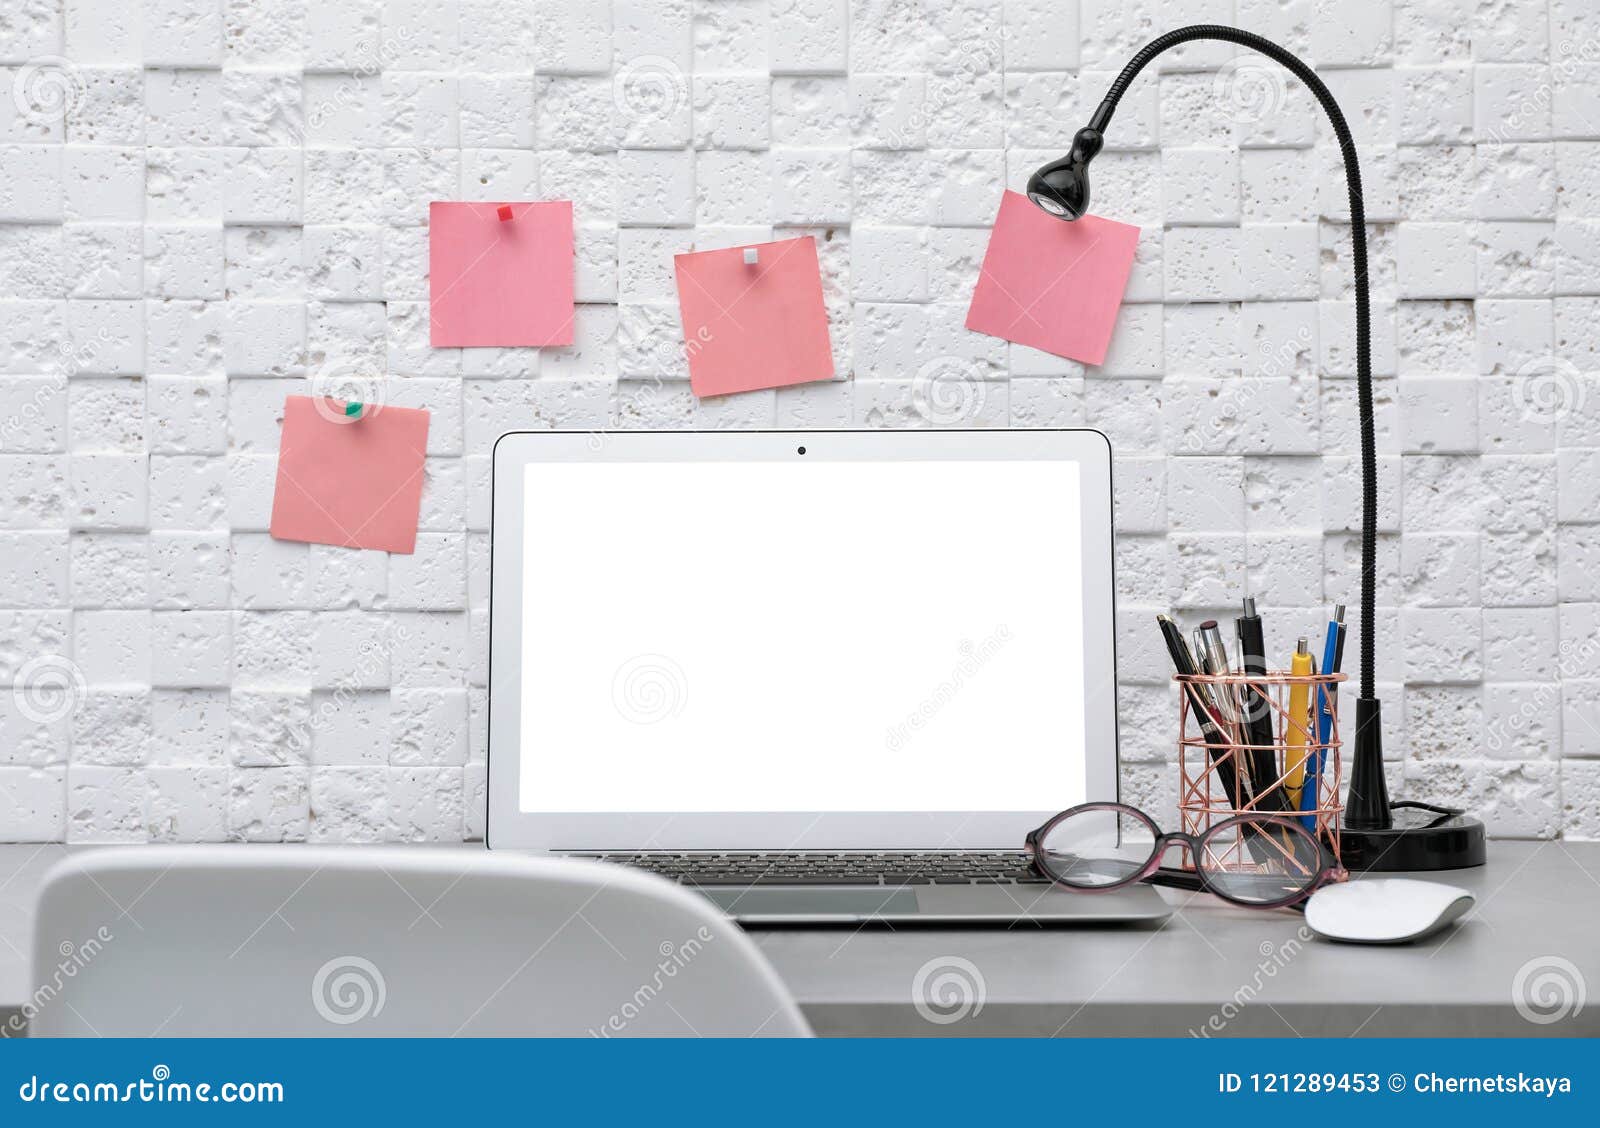 Laptop On Desk Against Light Wall In Home Office Stock Image